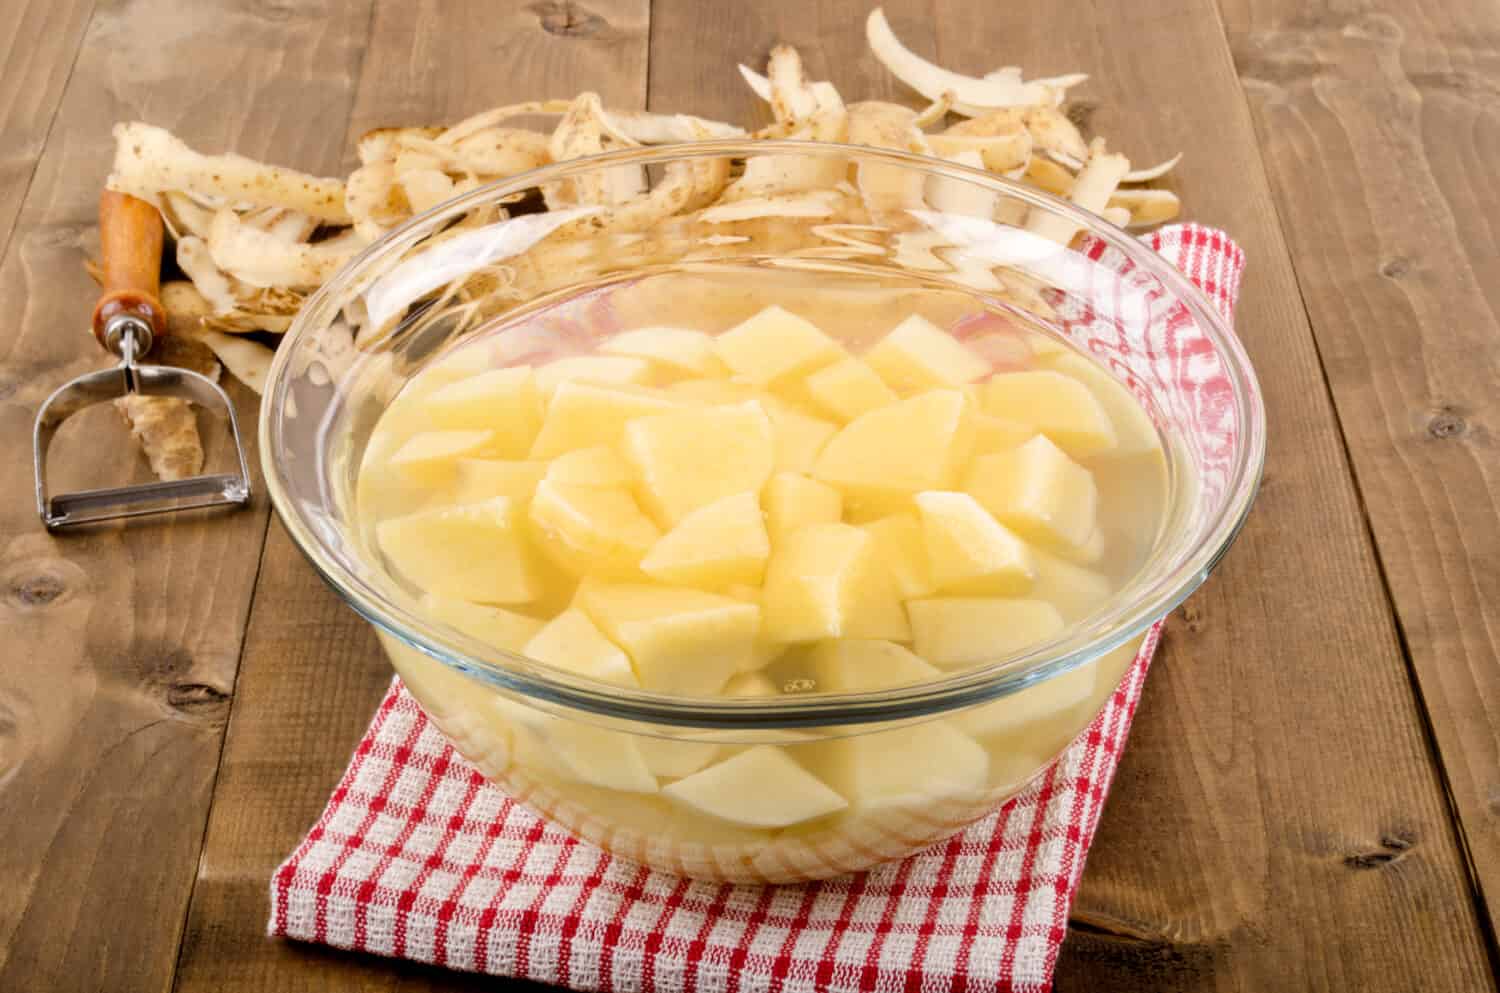 diced potatoes in a glass bowl with water to remove the potato starch